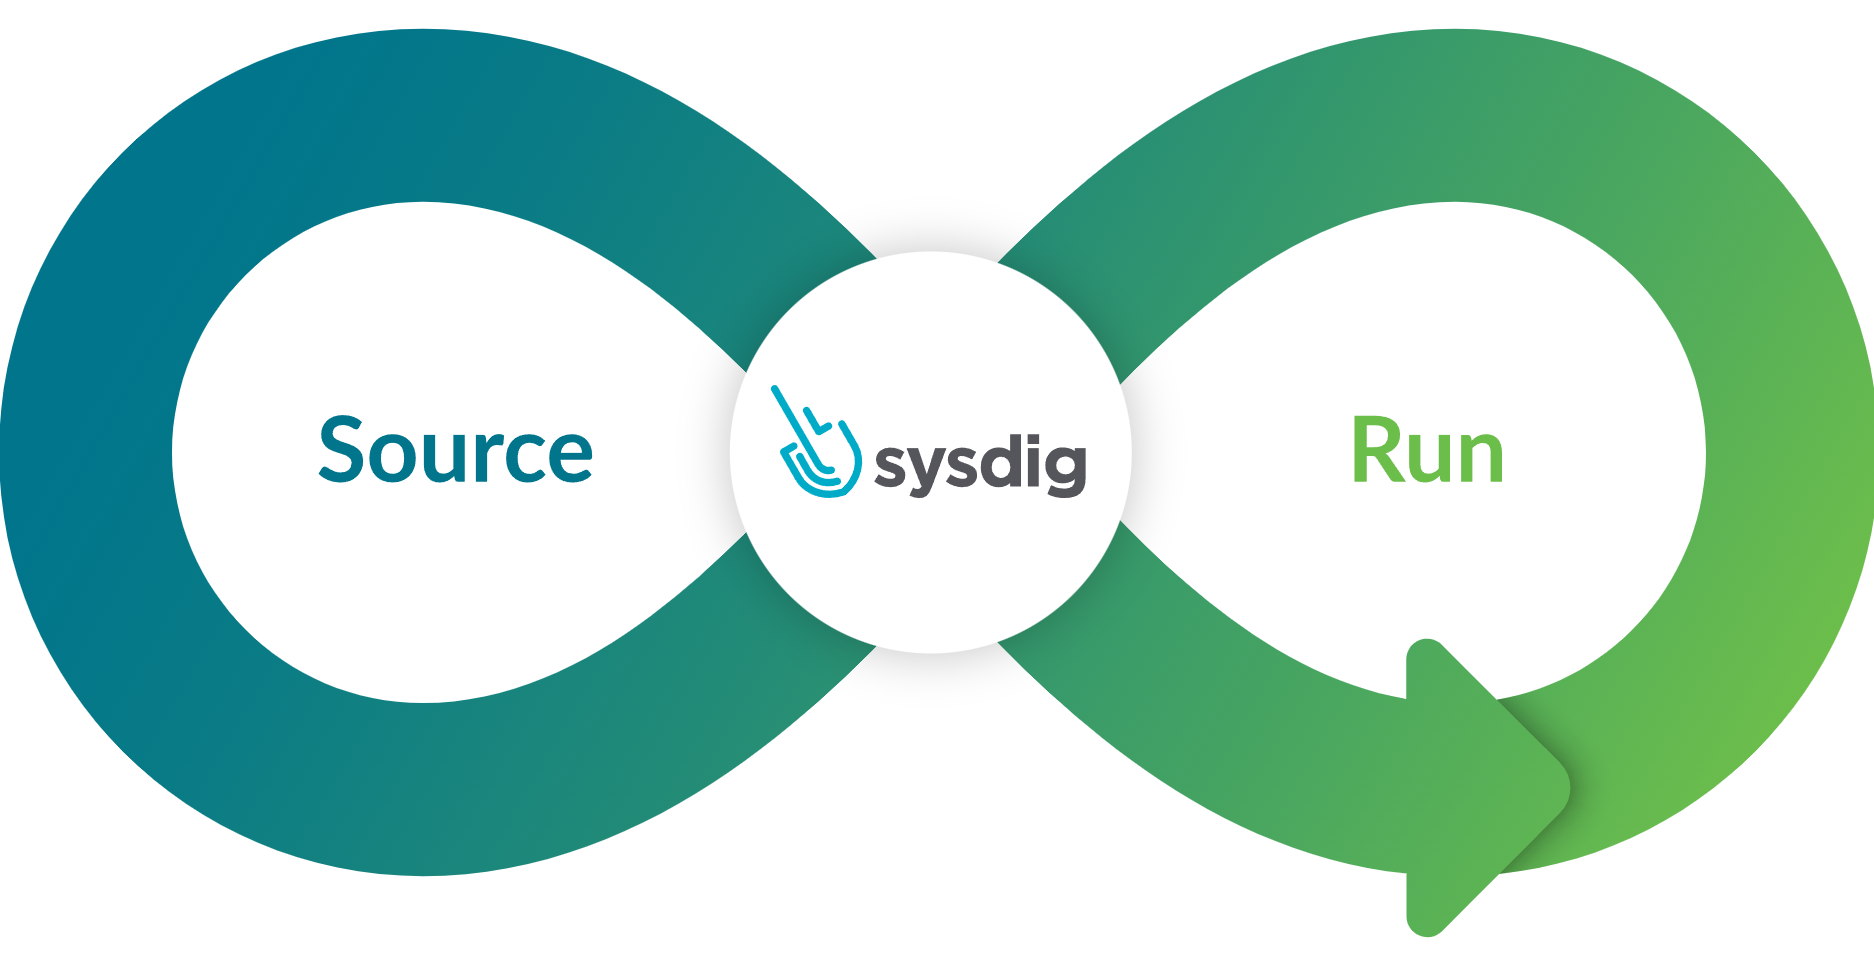 Sysdig's newest offerings help to automate cloud infrastructure-as-code security